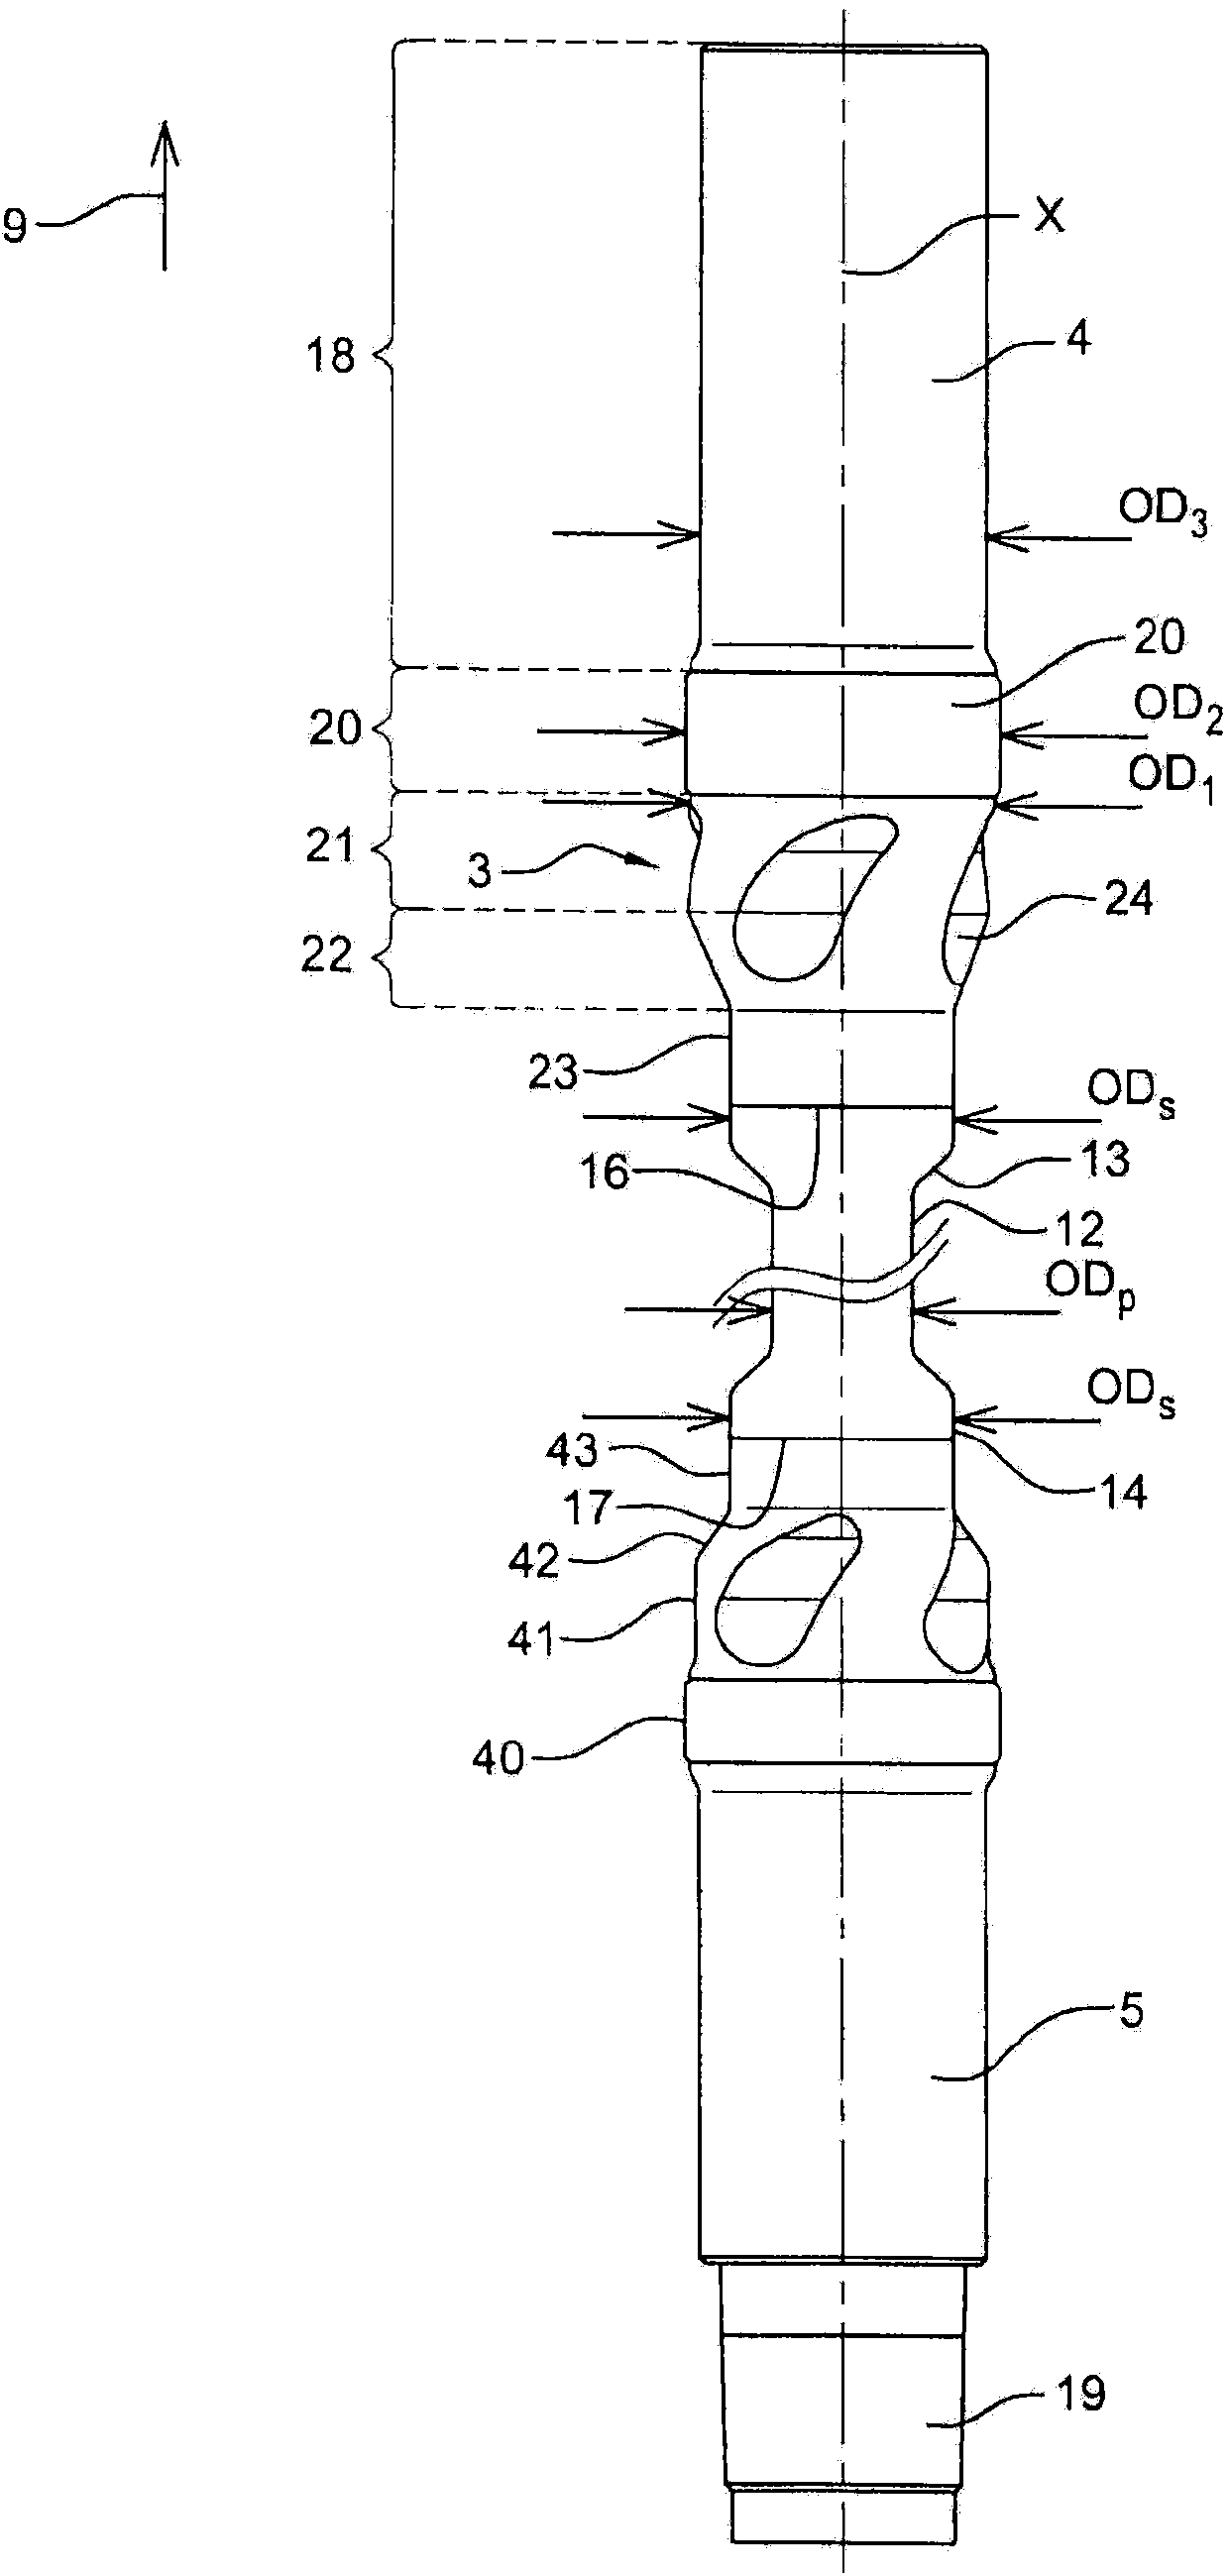 Drill string element with fluid activation area